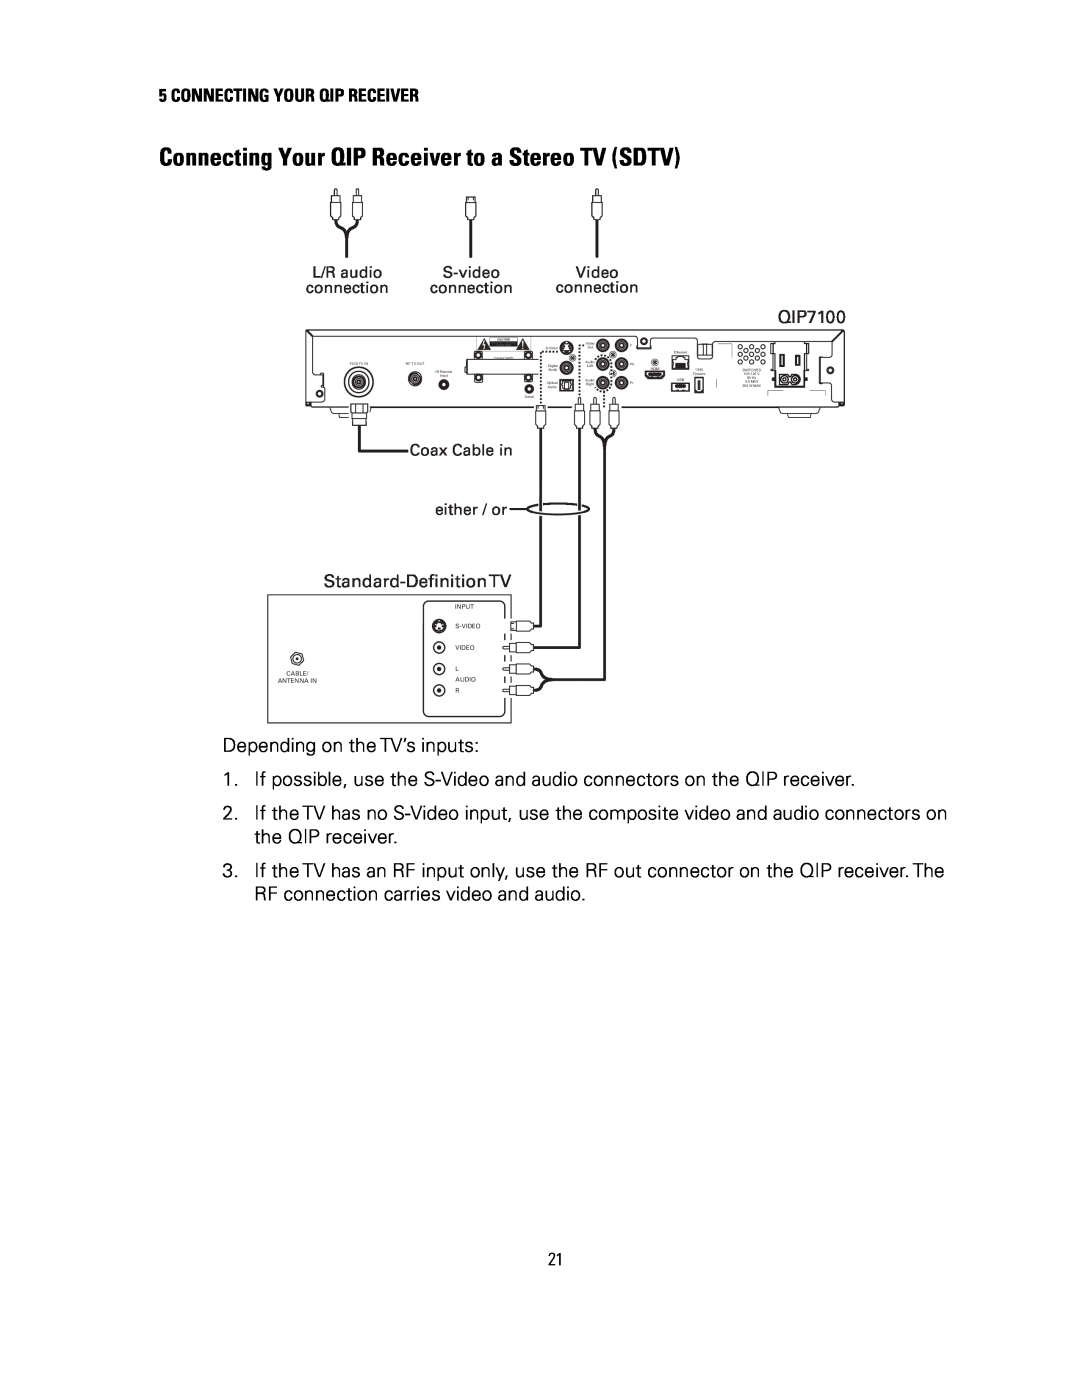 Motorola QIP7100 operation manual Connecting Your QIP Receiver to a Stereo TV SDTV 